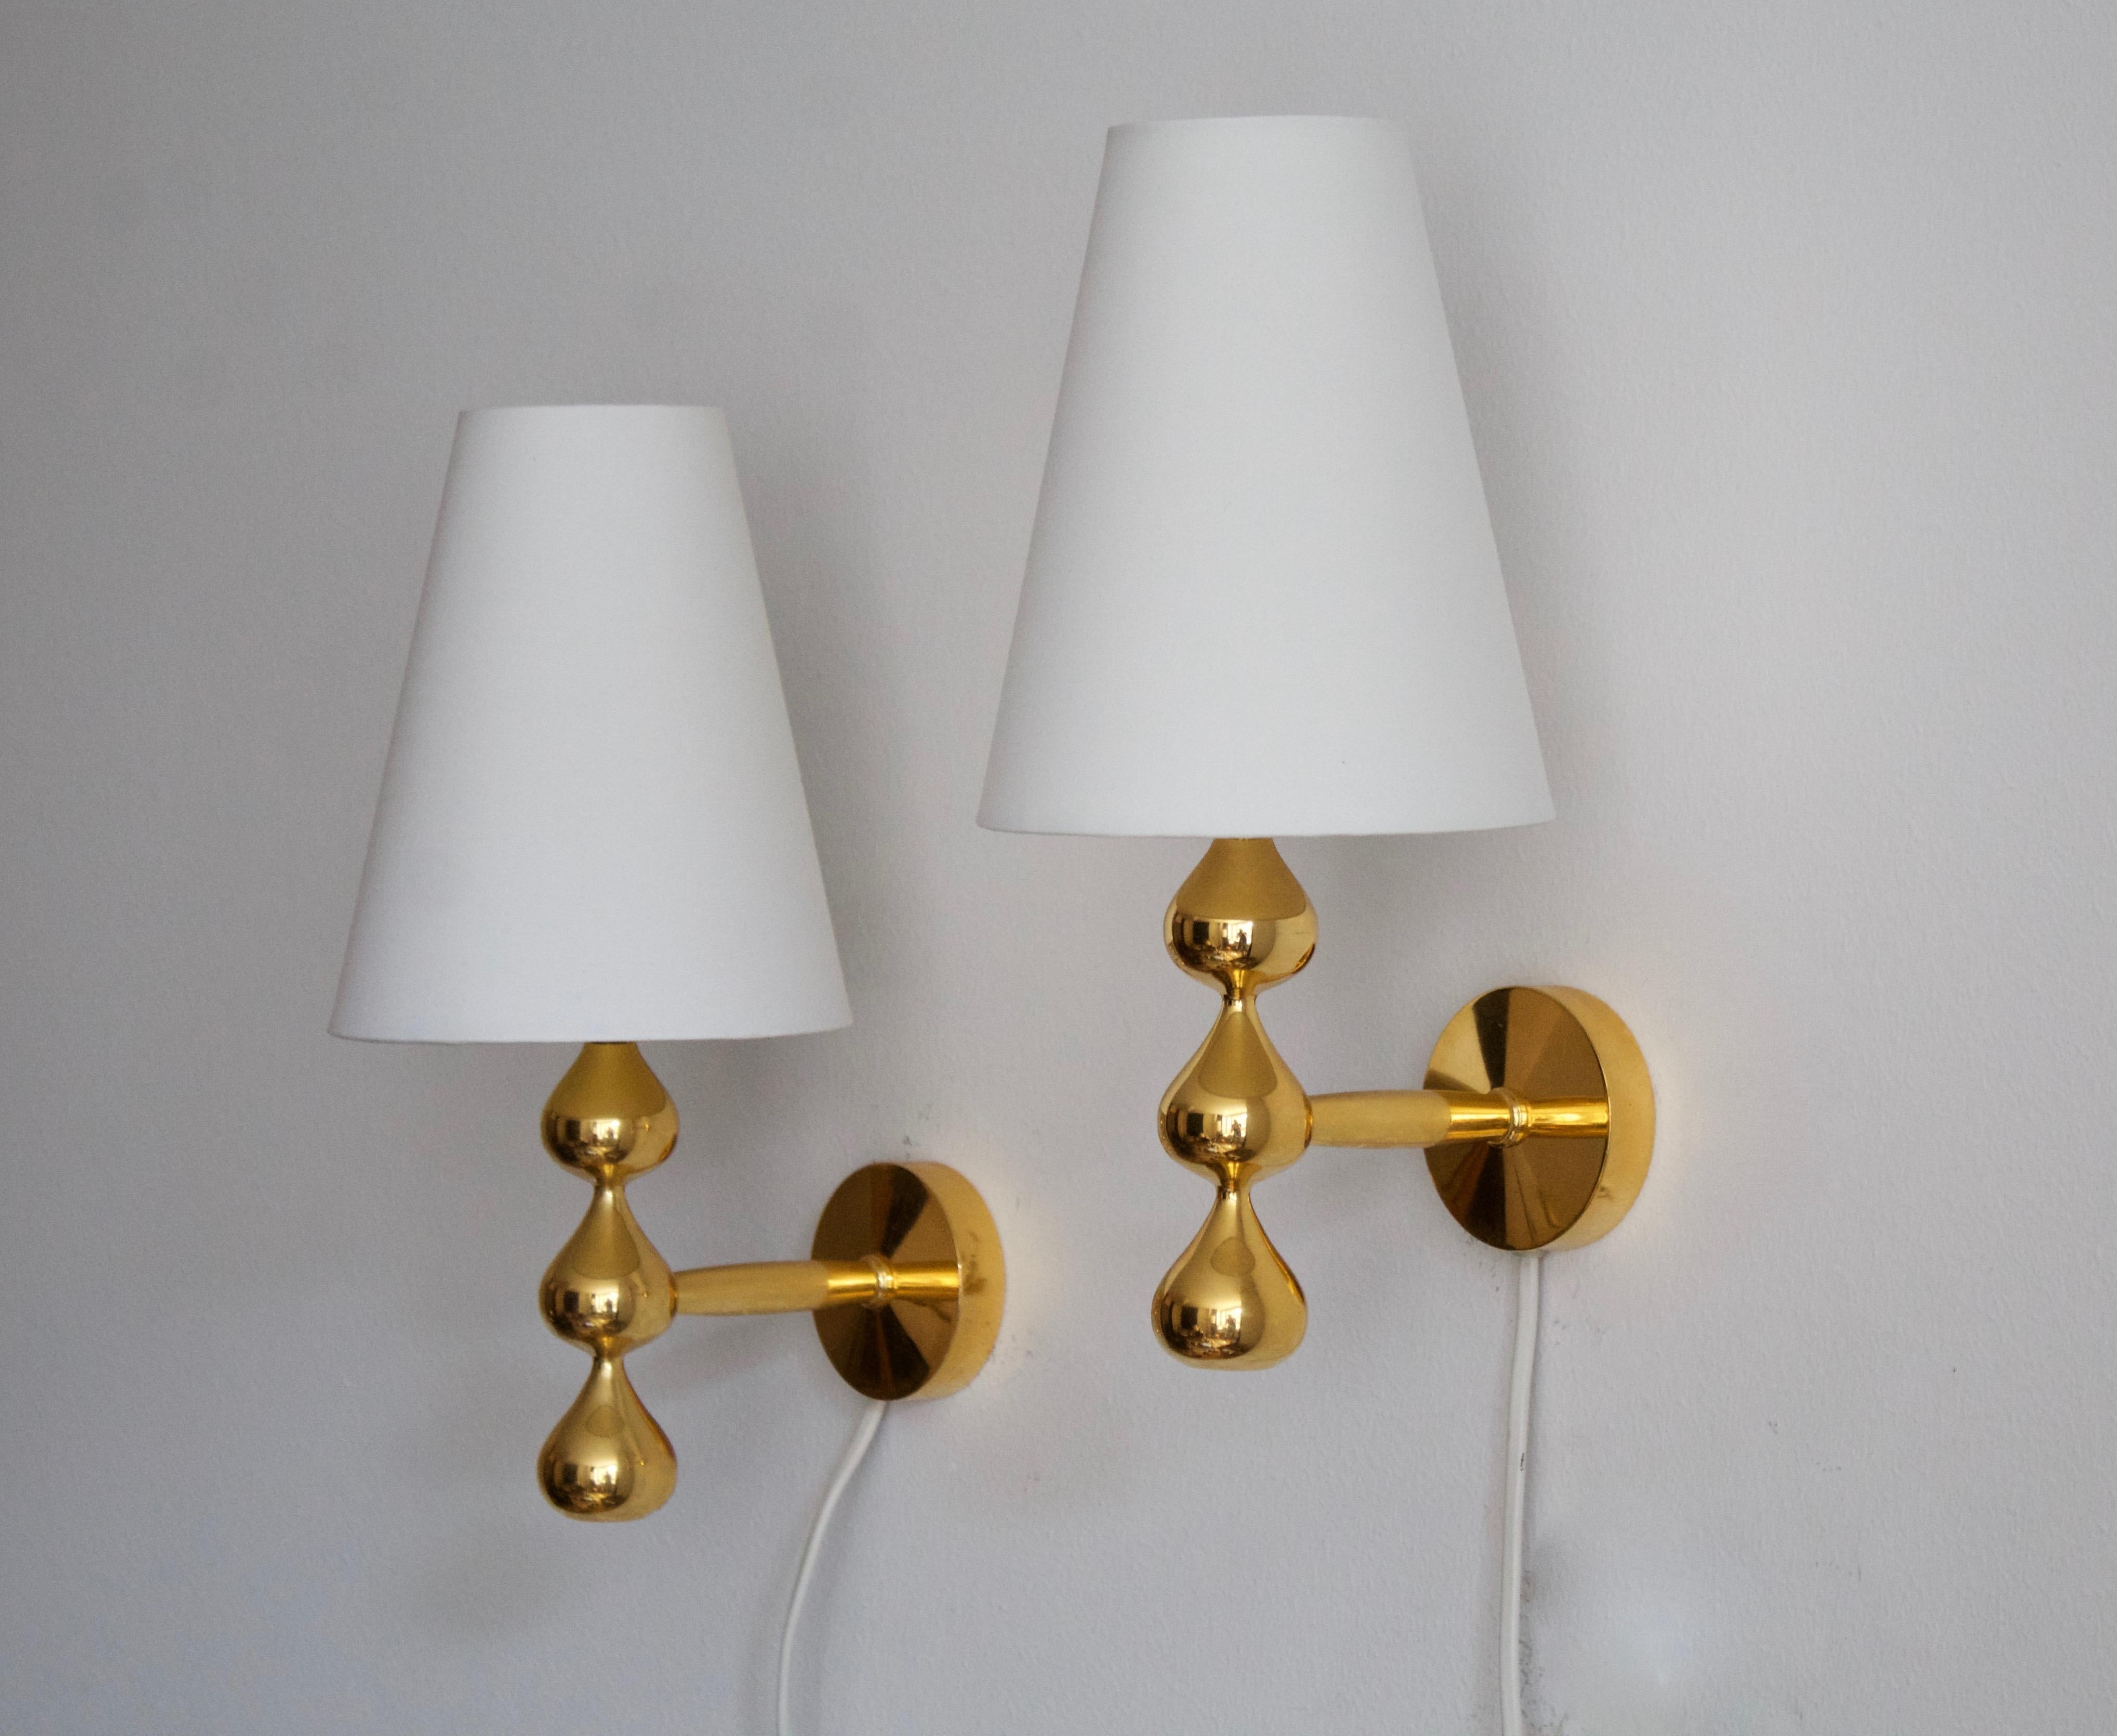 A pair of wall lights / sconces. Designed and produced by Assmussen Design, Denmark, firm founded in 1975, this pair of sconces produced c. 1980s. 

In 24-karat gold plate. Brand new lampshades.